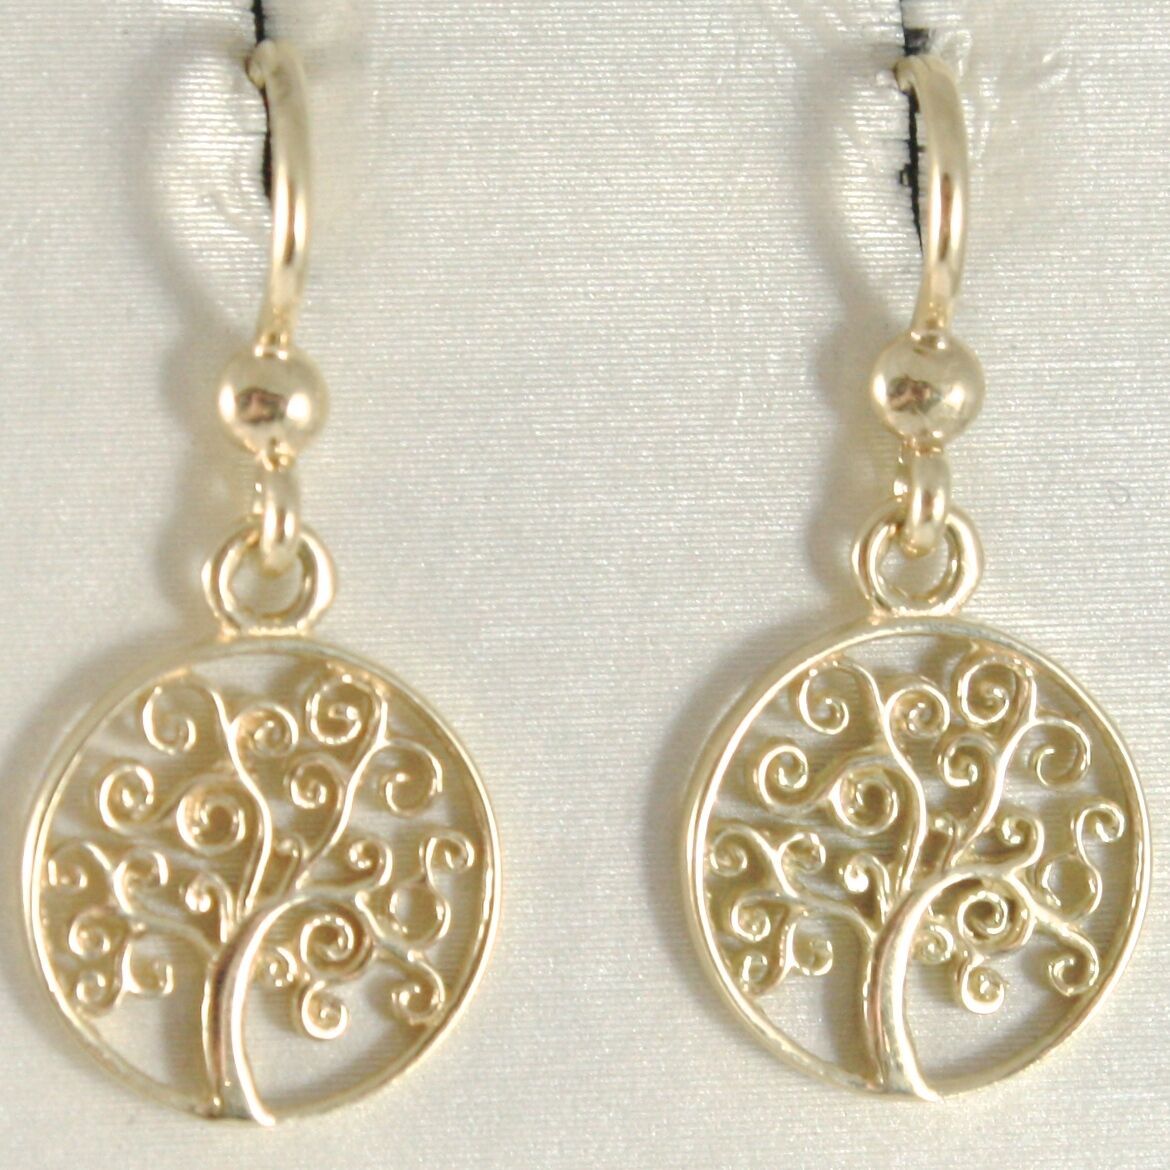 Primary image for 18K YELLOW GOLD PENDANT EARRINGS WITH BEAUTIFUL TREE OF LIFE, MADE IN ITALY